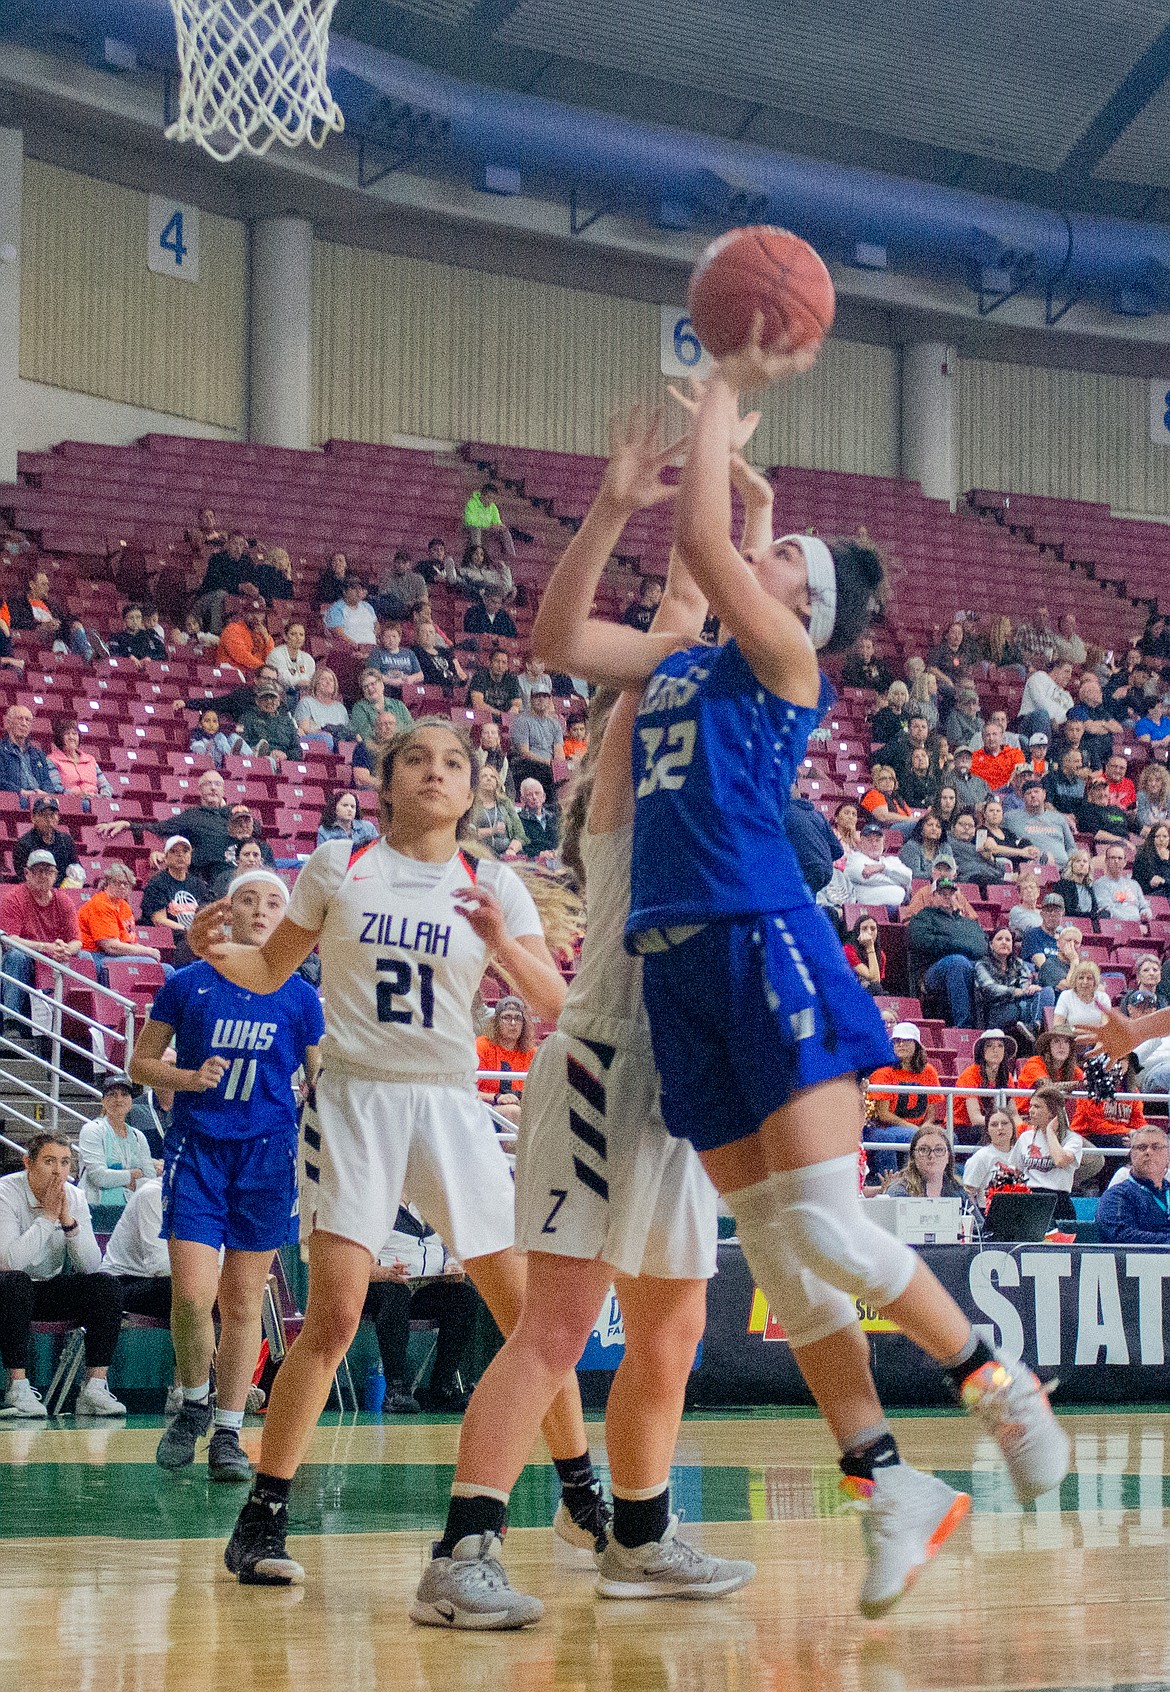 Warden sophomore Kiana Rios rises for the layup against the Zillah defender in the first half of a 65-49 win on Friday at the Yakima Valley SunDome.